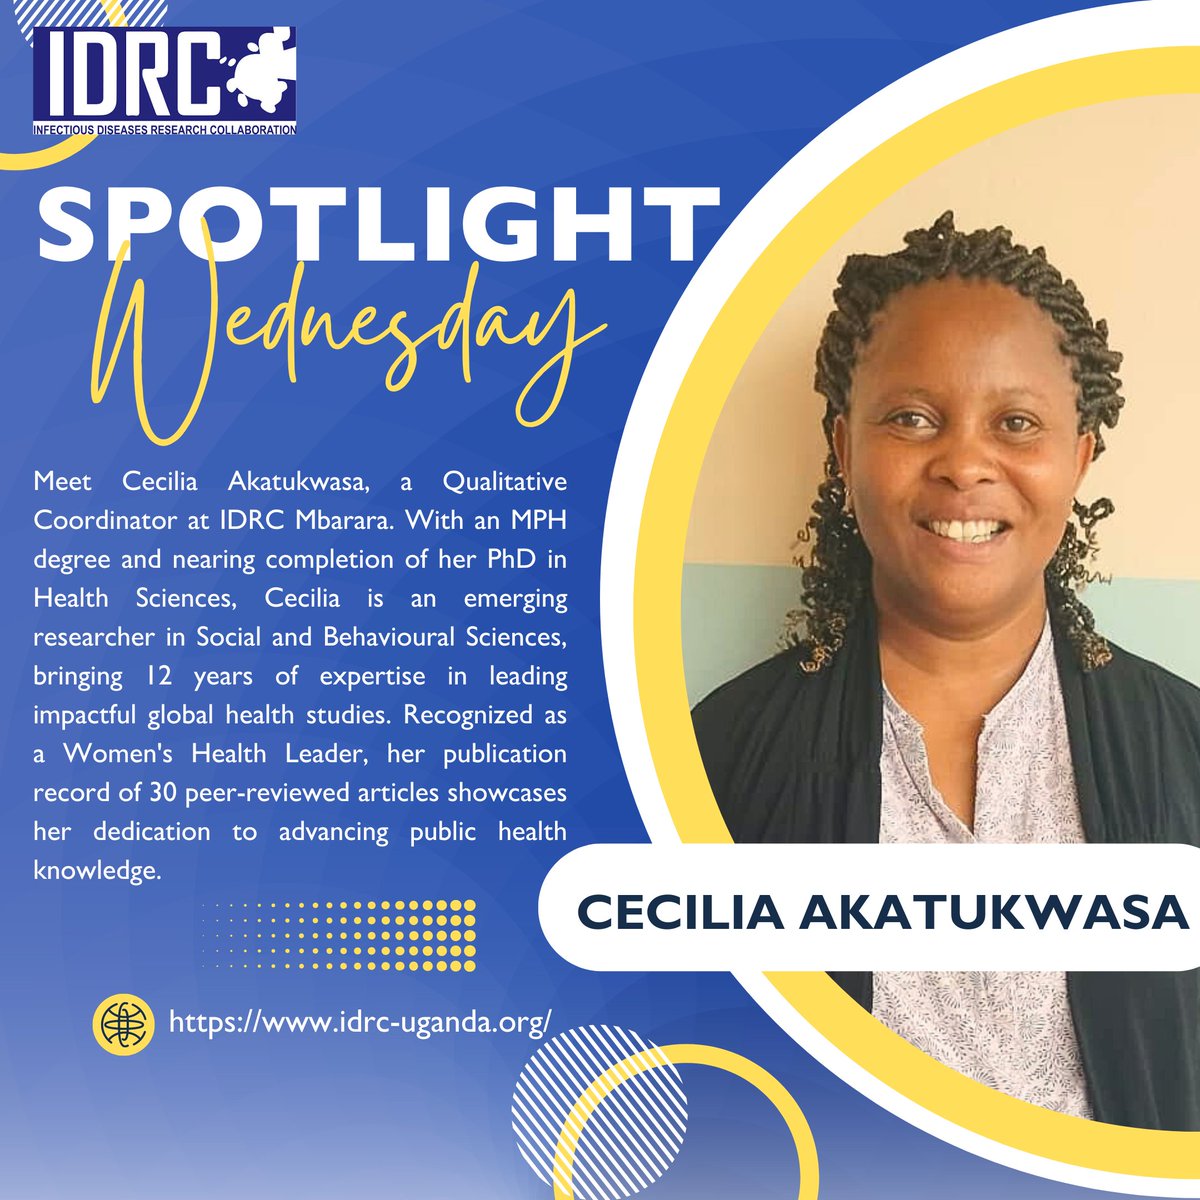 It's #SpotlightWednesday and we're excited to introduce Cecilia Akatukwasa, the talented Qualitative Coordinator at IDRC Mbarara! 🎉 With her impressive academic background and dedication to health research, she's truly an emerging force in the field. #ResearchRockstar